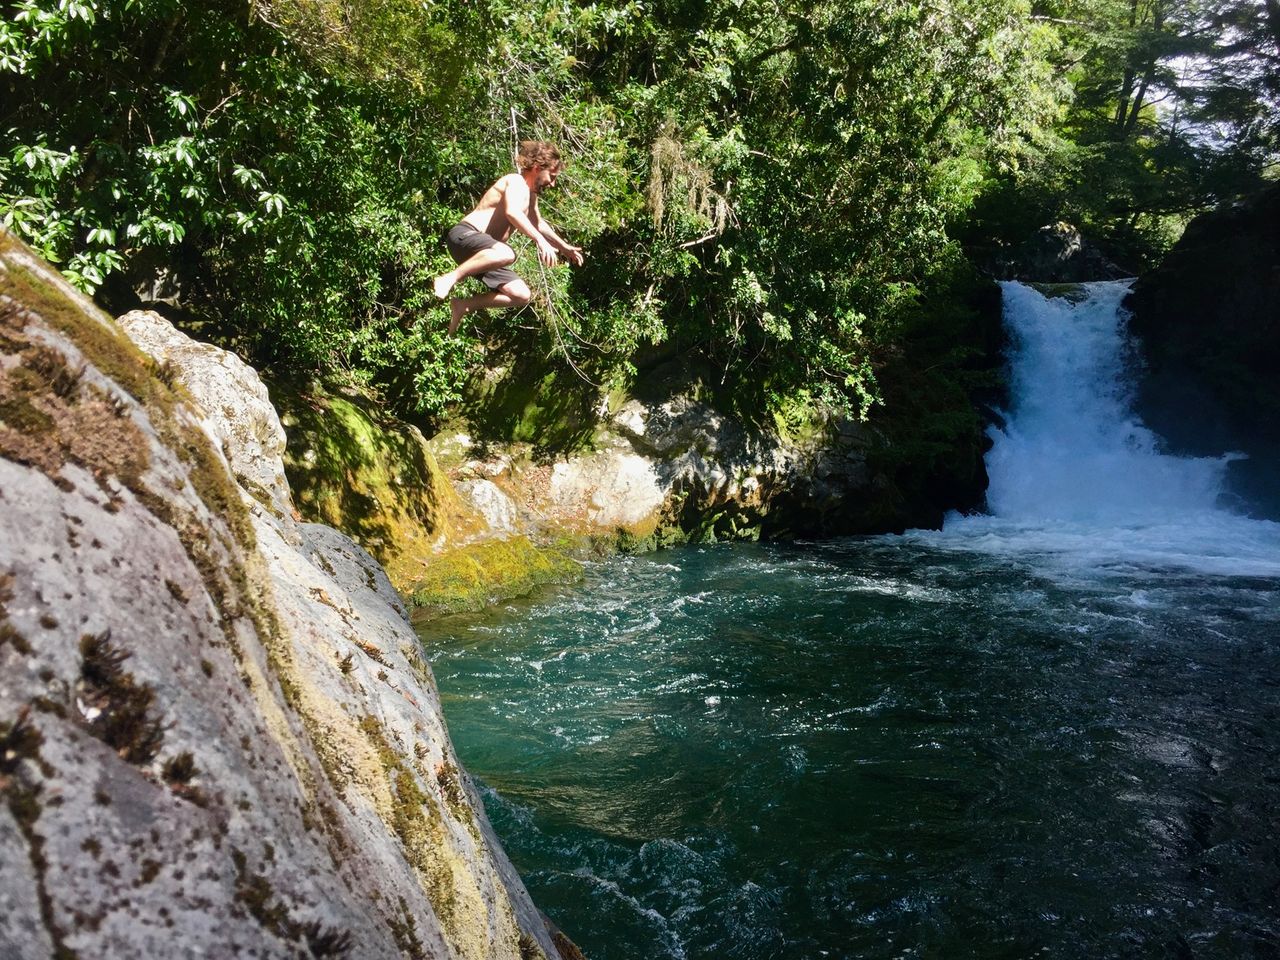 Man jumping into river from a tall rock.